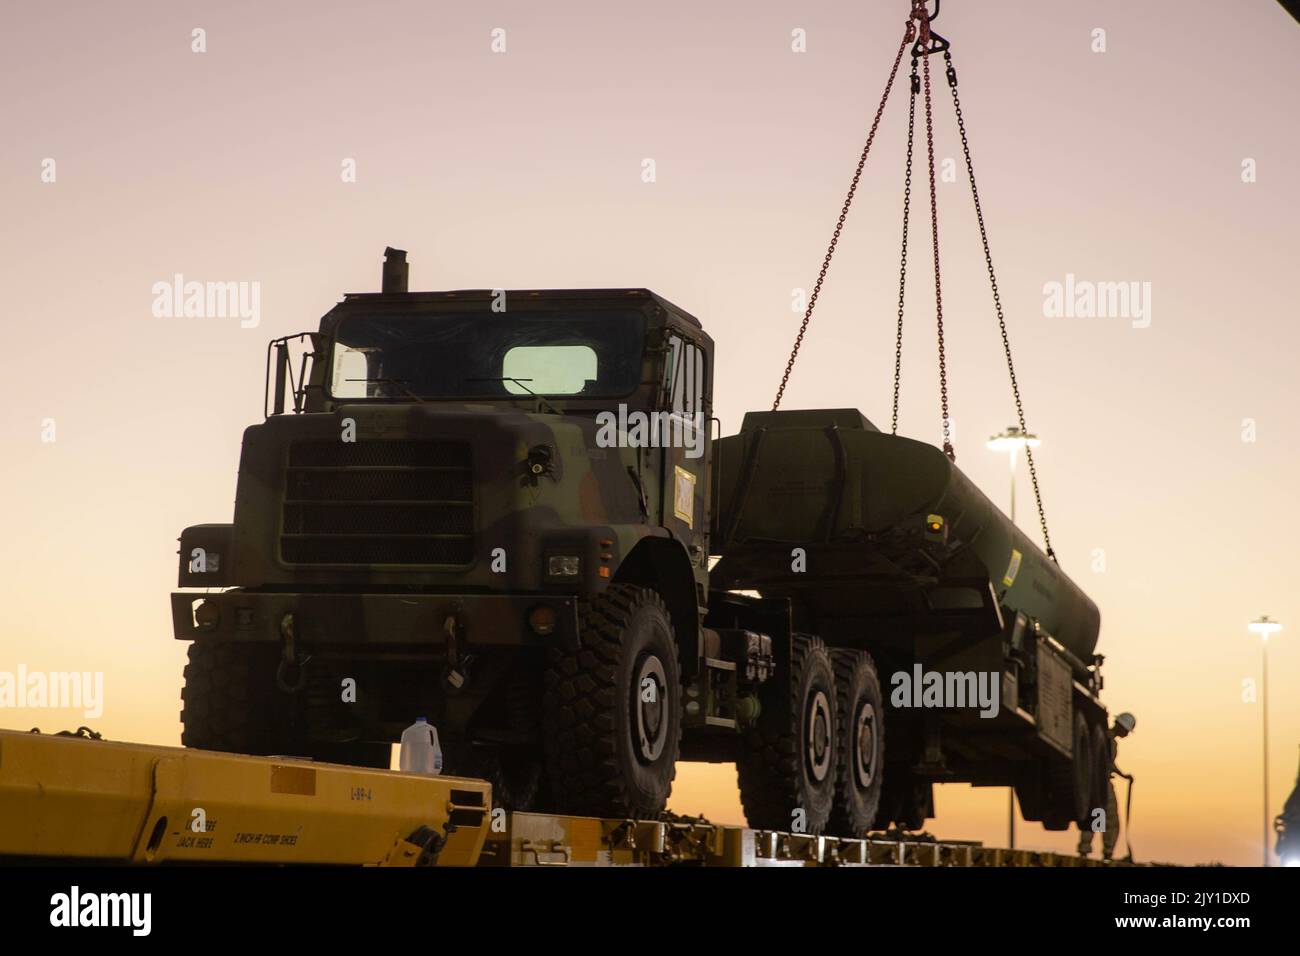 U.S. Marines with 2nd Transportation Battalion (TB), Combat Logistics Regiment 27, 2nd Marine Logistics Group, lift a M970 Semitrailer Refueler with a Terex-Demag MAC 50 All-Terrain Crane at the Mesquite Regional Landfill Railyard in Glamis, California, Aug. 27, 2022. 1st Landing Support Battalion and 2nd Transportation Battalion led railhead operations from August 26 to September 1, 2022, in order to deliver logistical support for Weapons and Tactics Instructor Course 1-23 being conducted at Marine Corps Air Station Yuma in Yuma, Arizona. (U.S. Marine Corps photo by Lance Cpl. Sixto Castro) Stock Photo